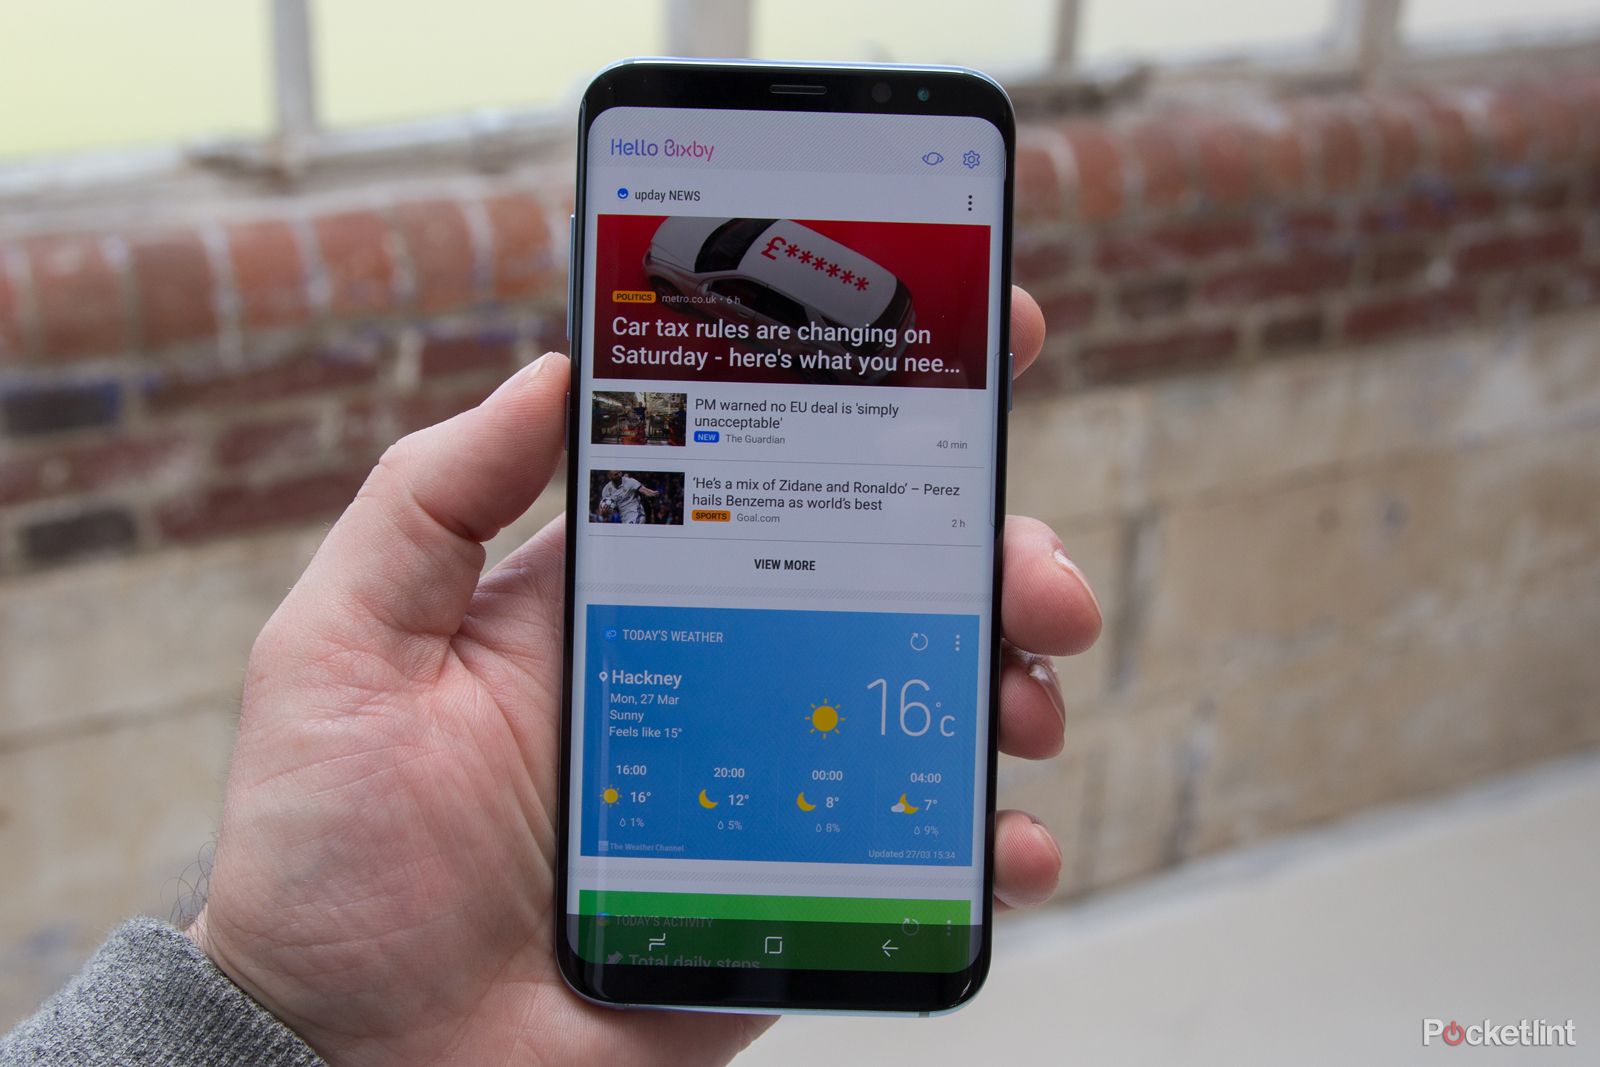 bixby samsung s smart ai launches on the galaxy s8 but only supports us english and korean image 1